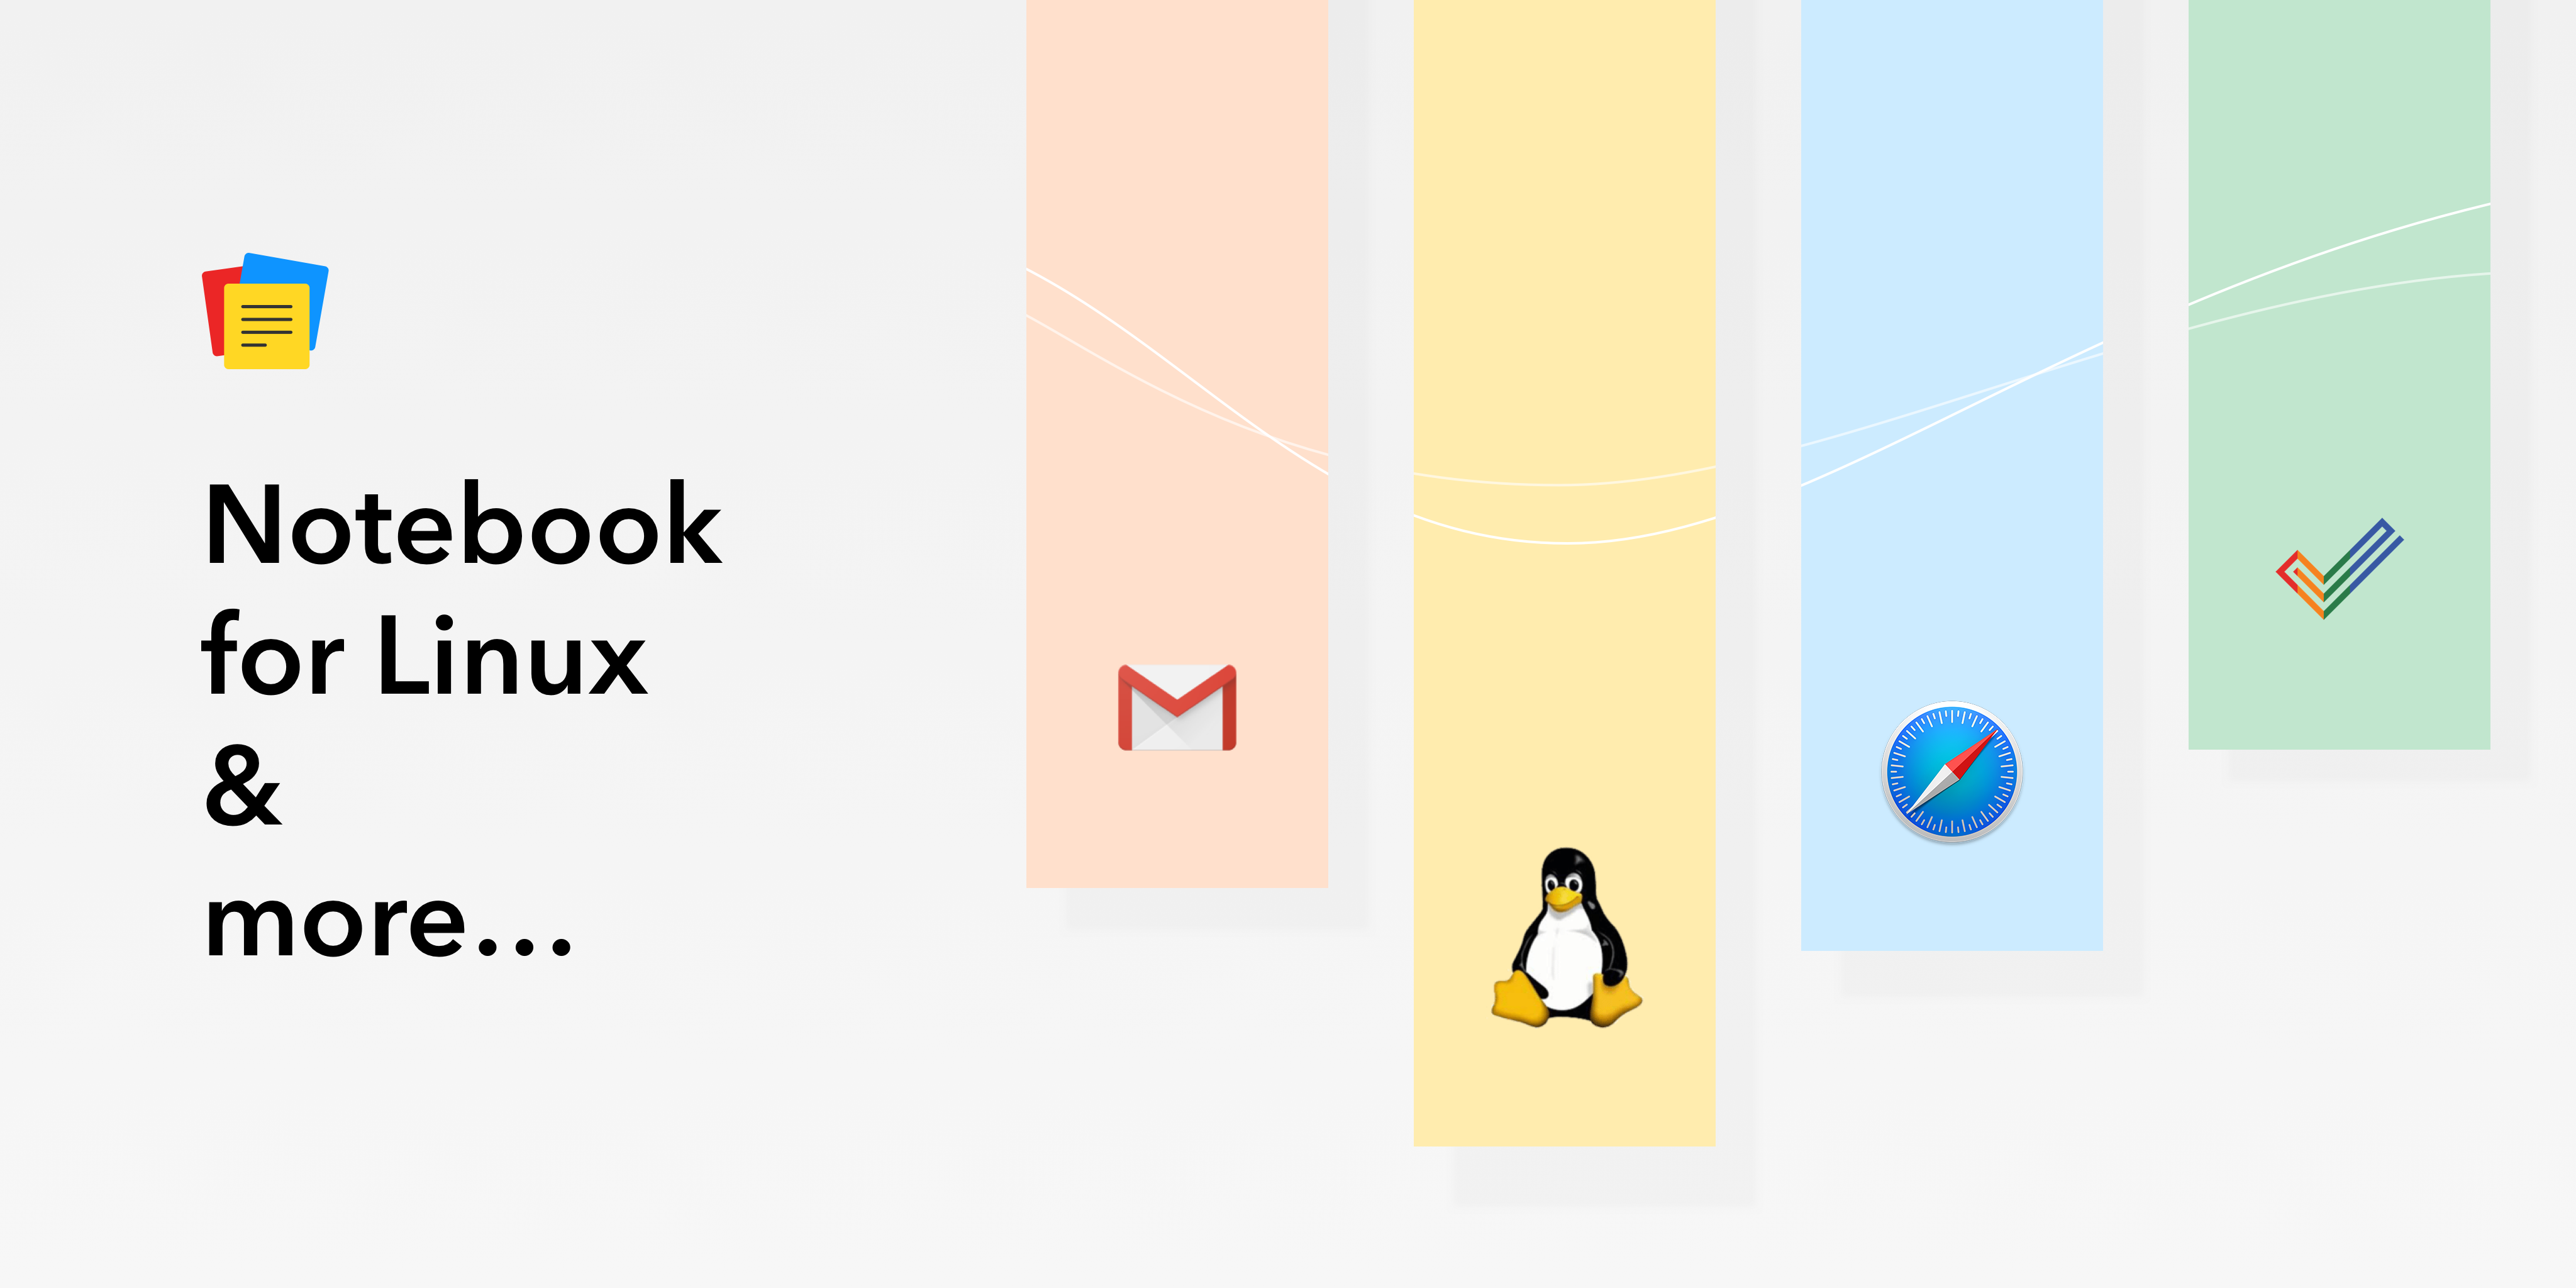 Notebook update: Introducing Notebook for Linux, Gmail Add-on, New Integrations and more.